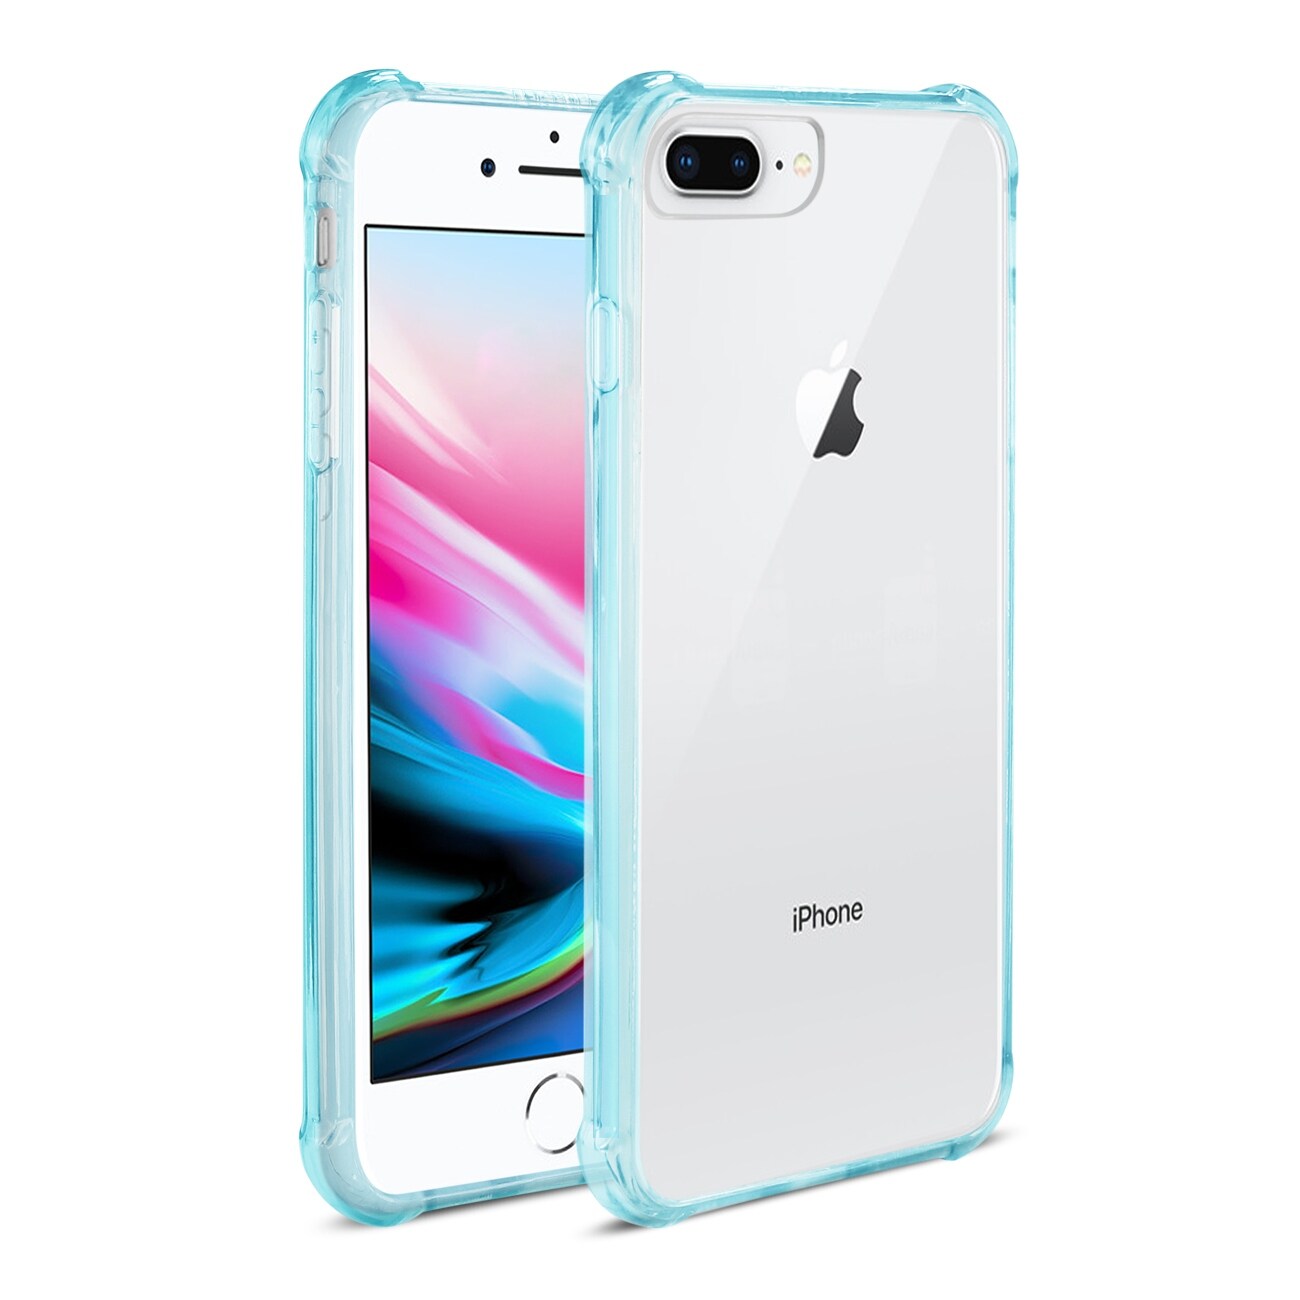 Reiko iPhone 8 Plus Clear Bumper Case With Air Cushion Protection In Clear Black 